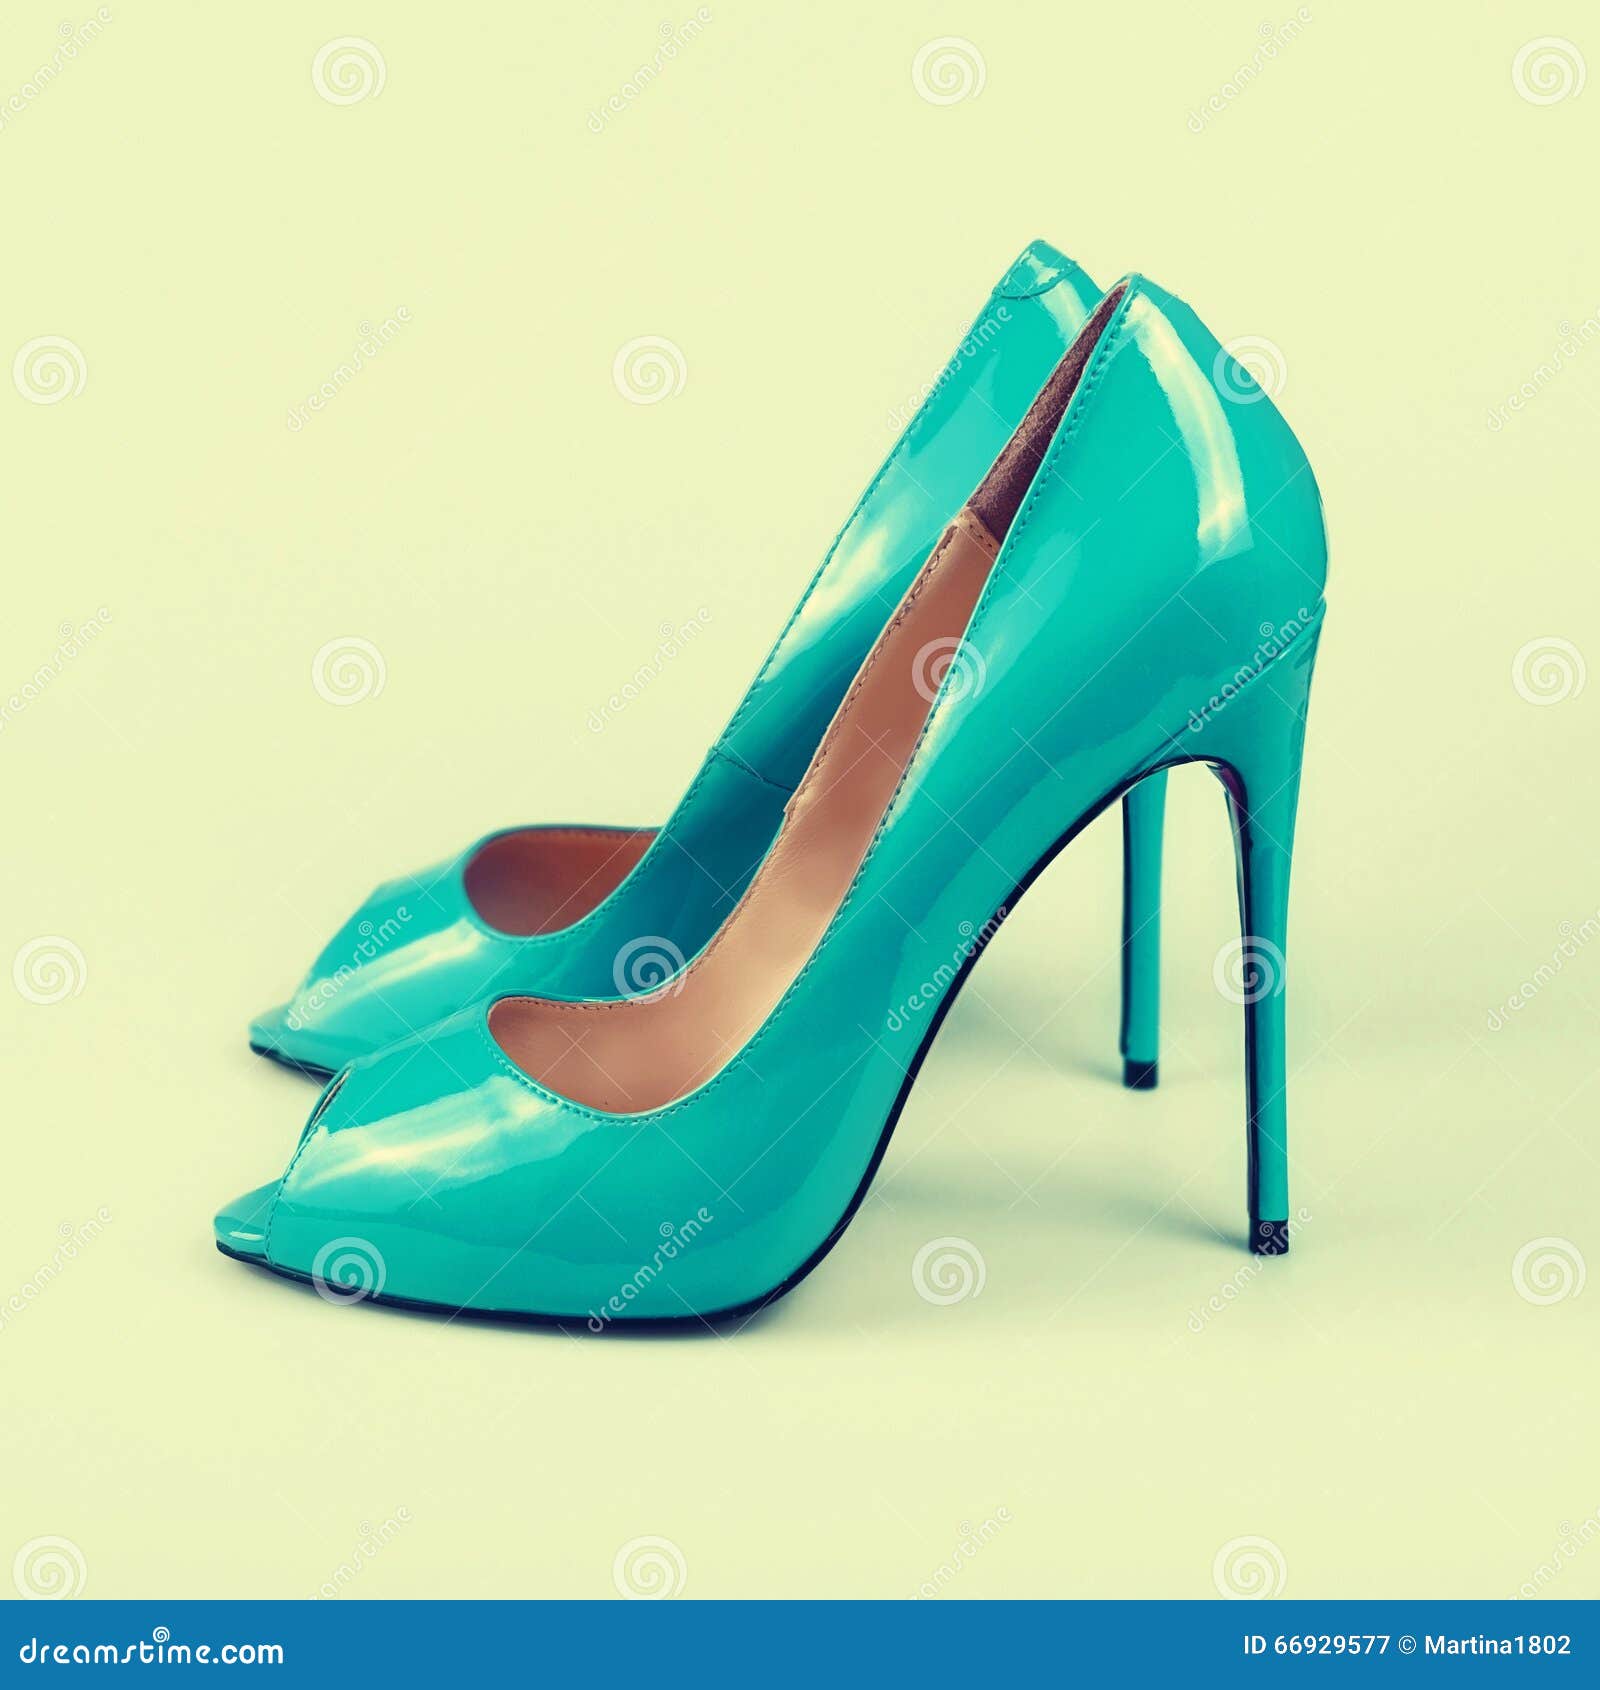 Blue shoes on the white stock image. Image of heel, stiletto - 66929577